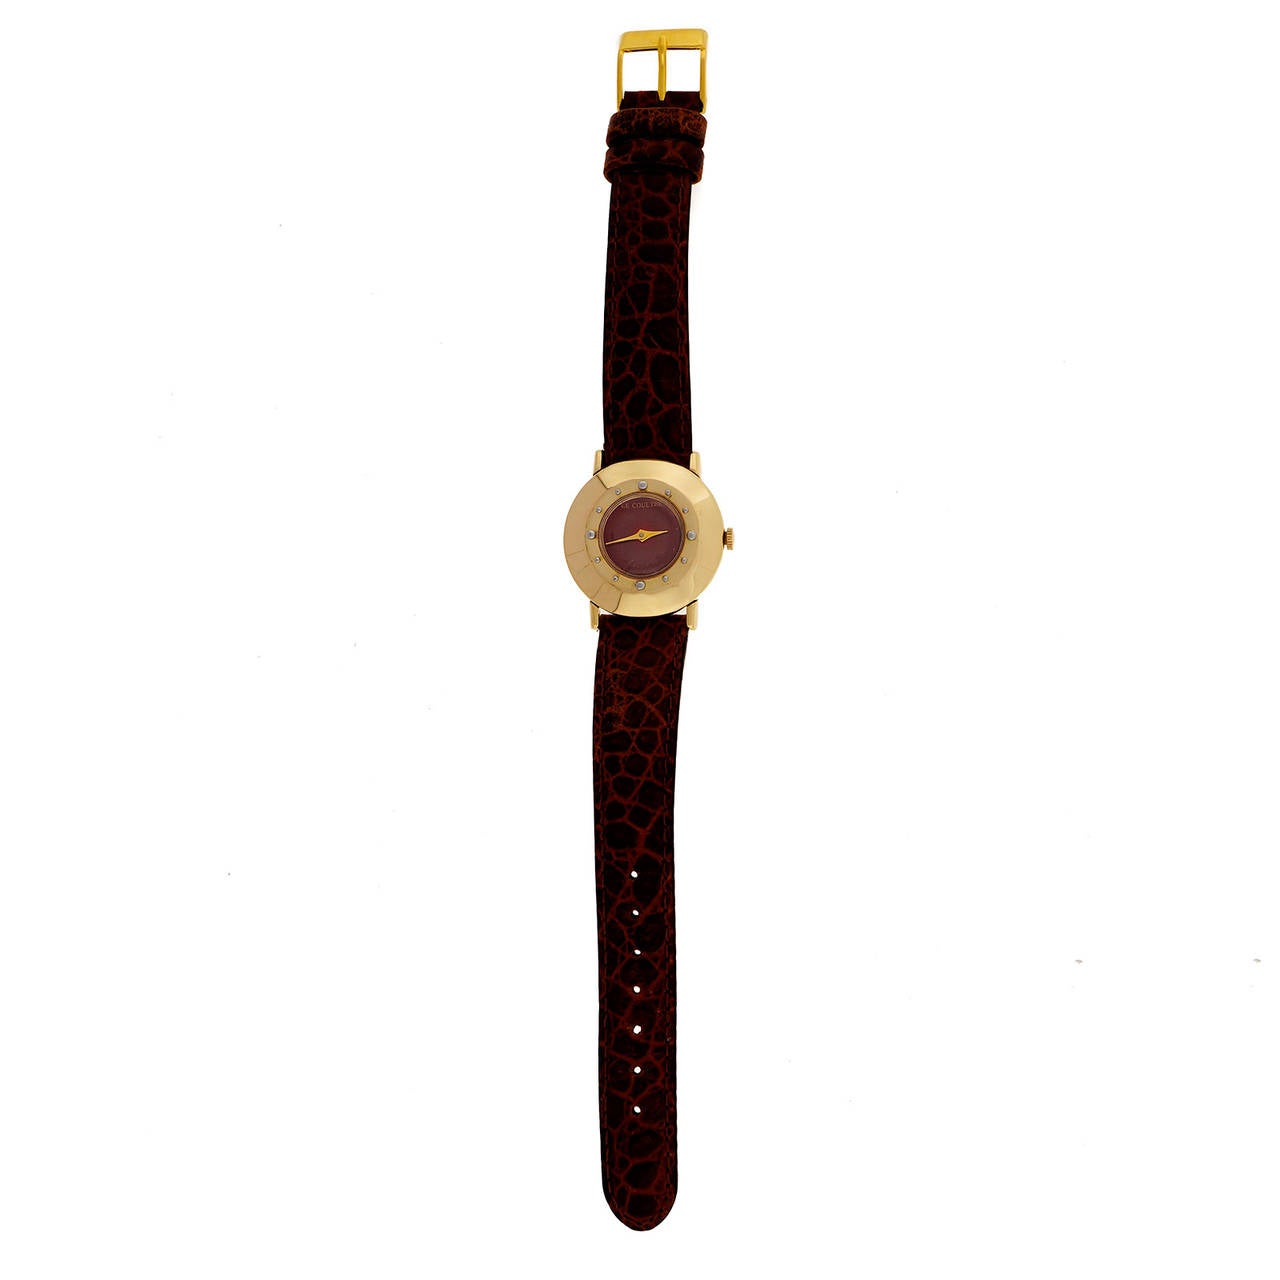 LeCoultre Lady's 14k Yellow Gold Wristwatch with Custom-Colored Dial, circa 1950s

14k Yellow Gold
Length: 32.58mm
Width: 29.12mm
Strap width at case: 16mm
Case thickness: 8.5mm
Dial: Custom-colored red
Movement: 480 CW LeCoultre Co Swiss 17